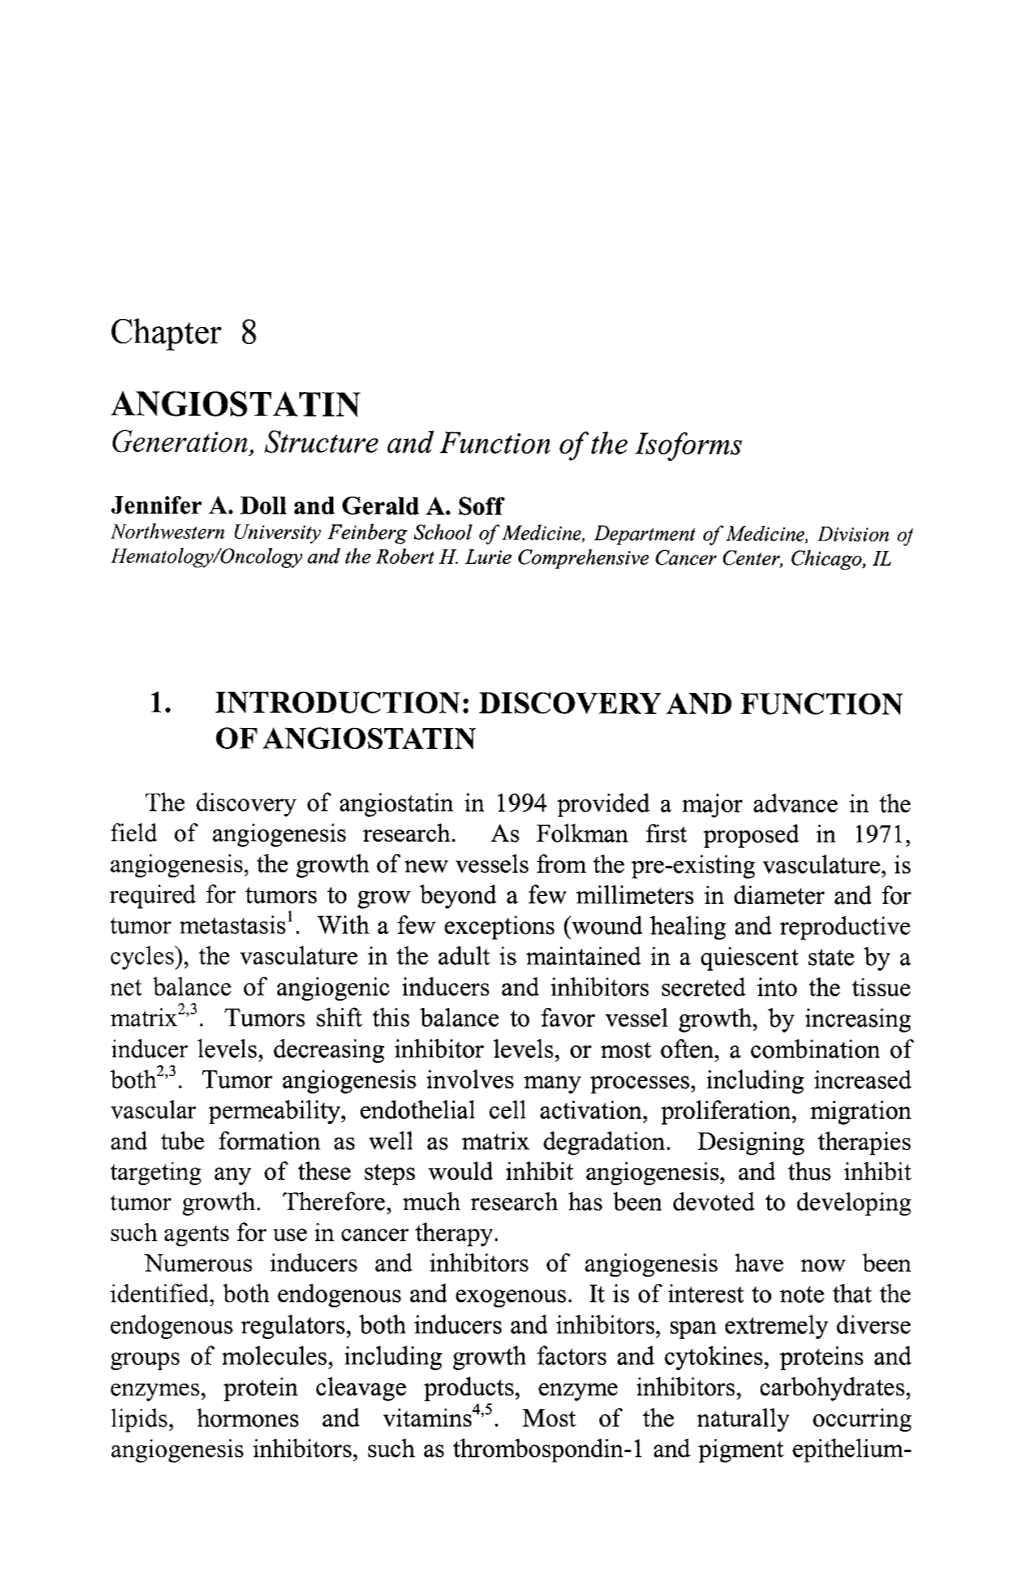 Chapter 8 ANGIOSTATIN Generation, Structure and Function of the Isoforms